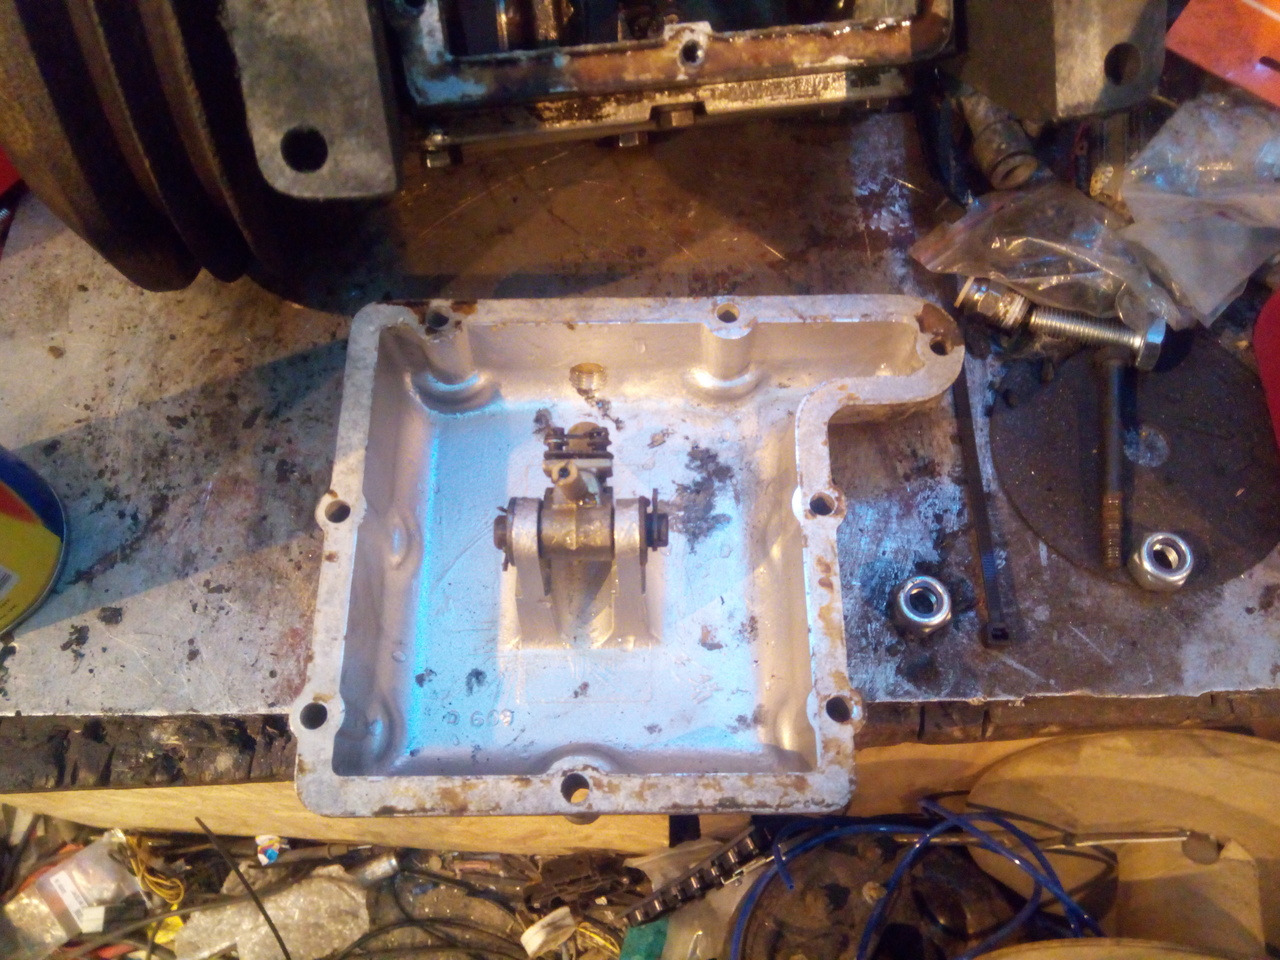 The inside of the compressor's sump, now spotlessly clean.